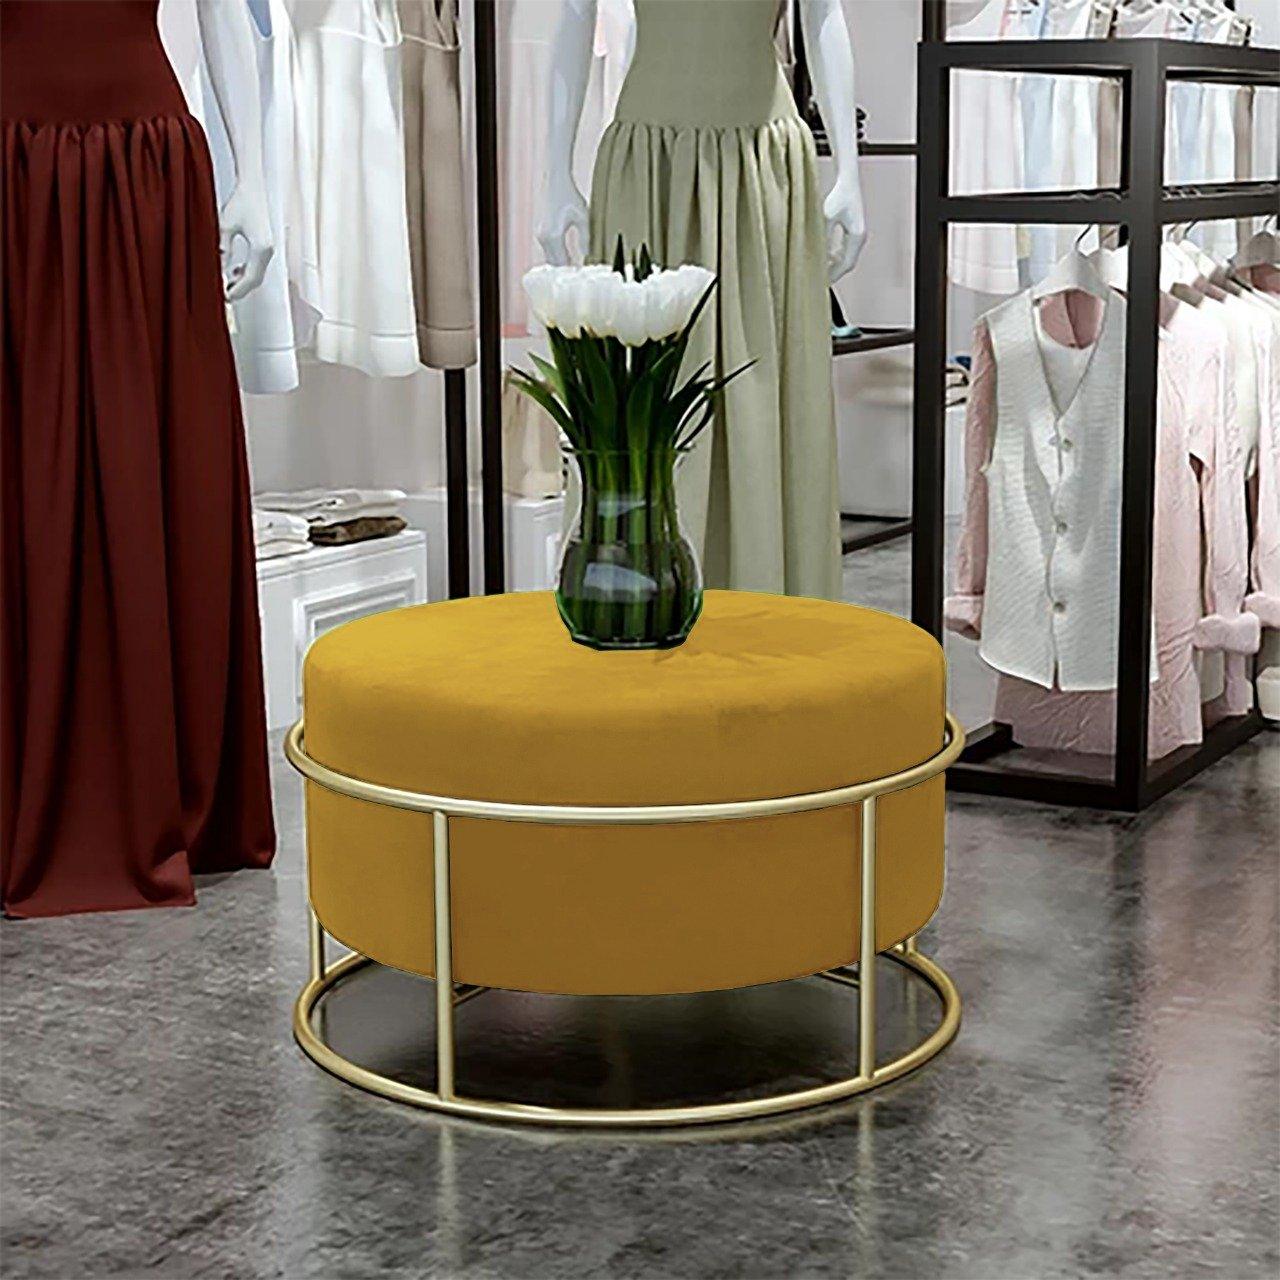 Luxury Wooden Round stool With Steel Stand -299 - 92Bedding